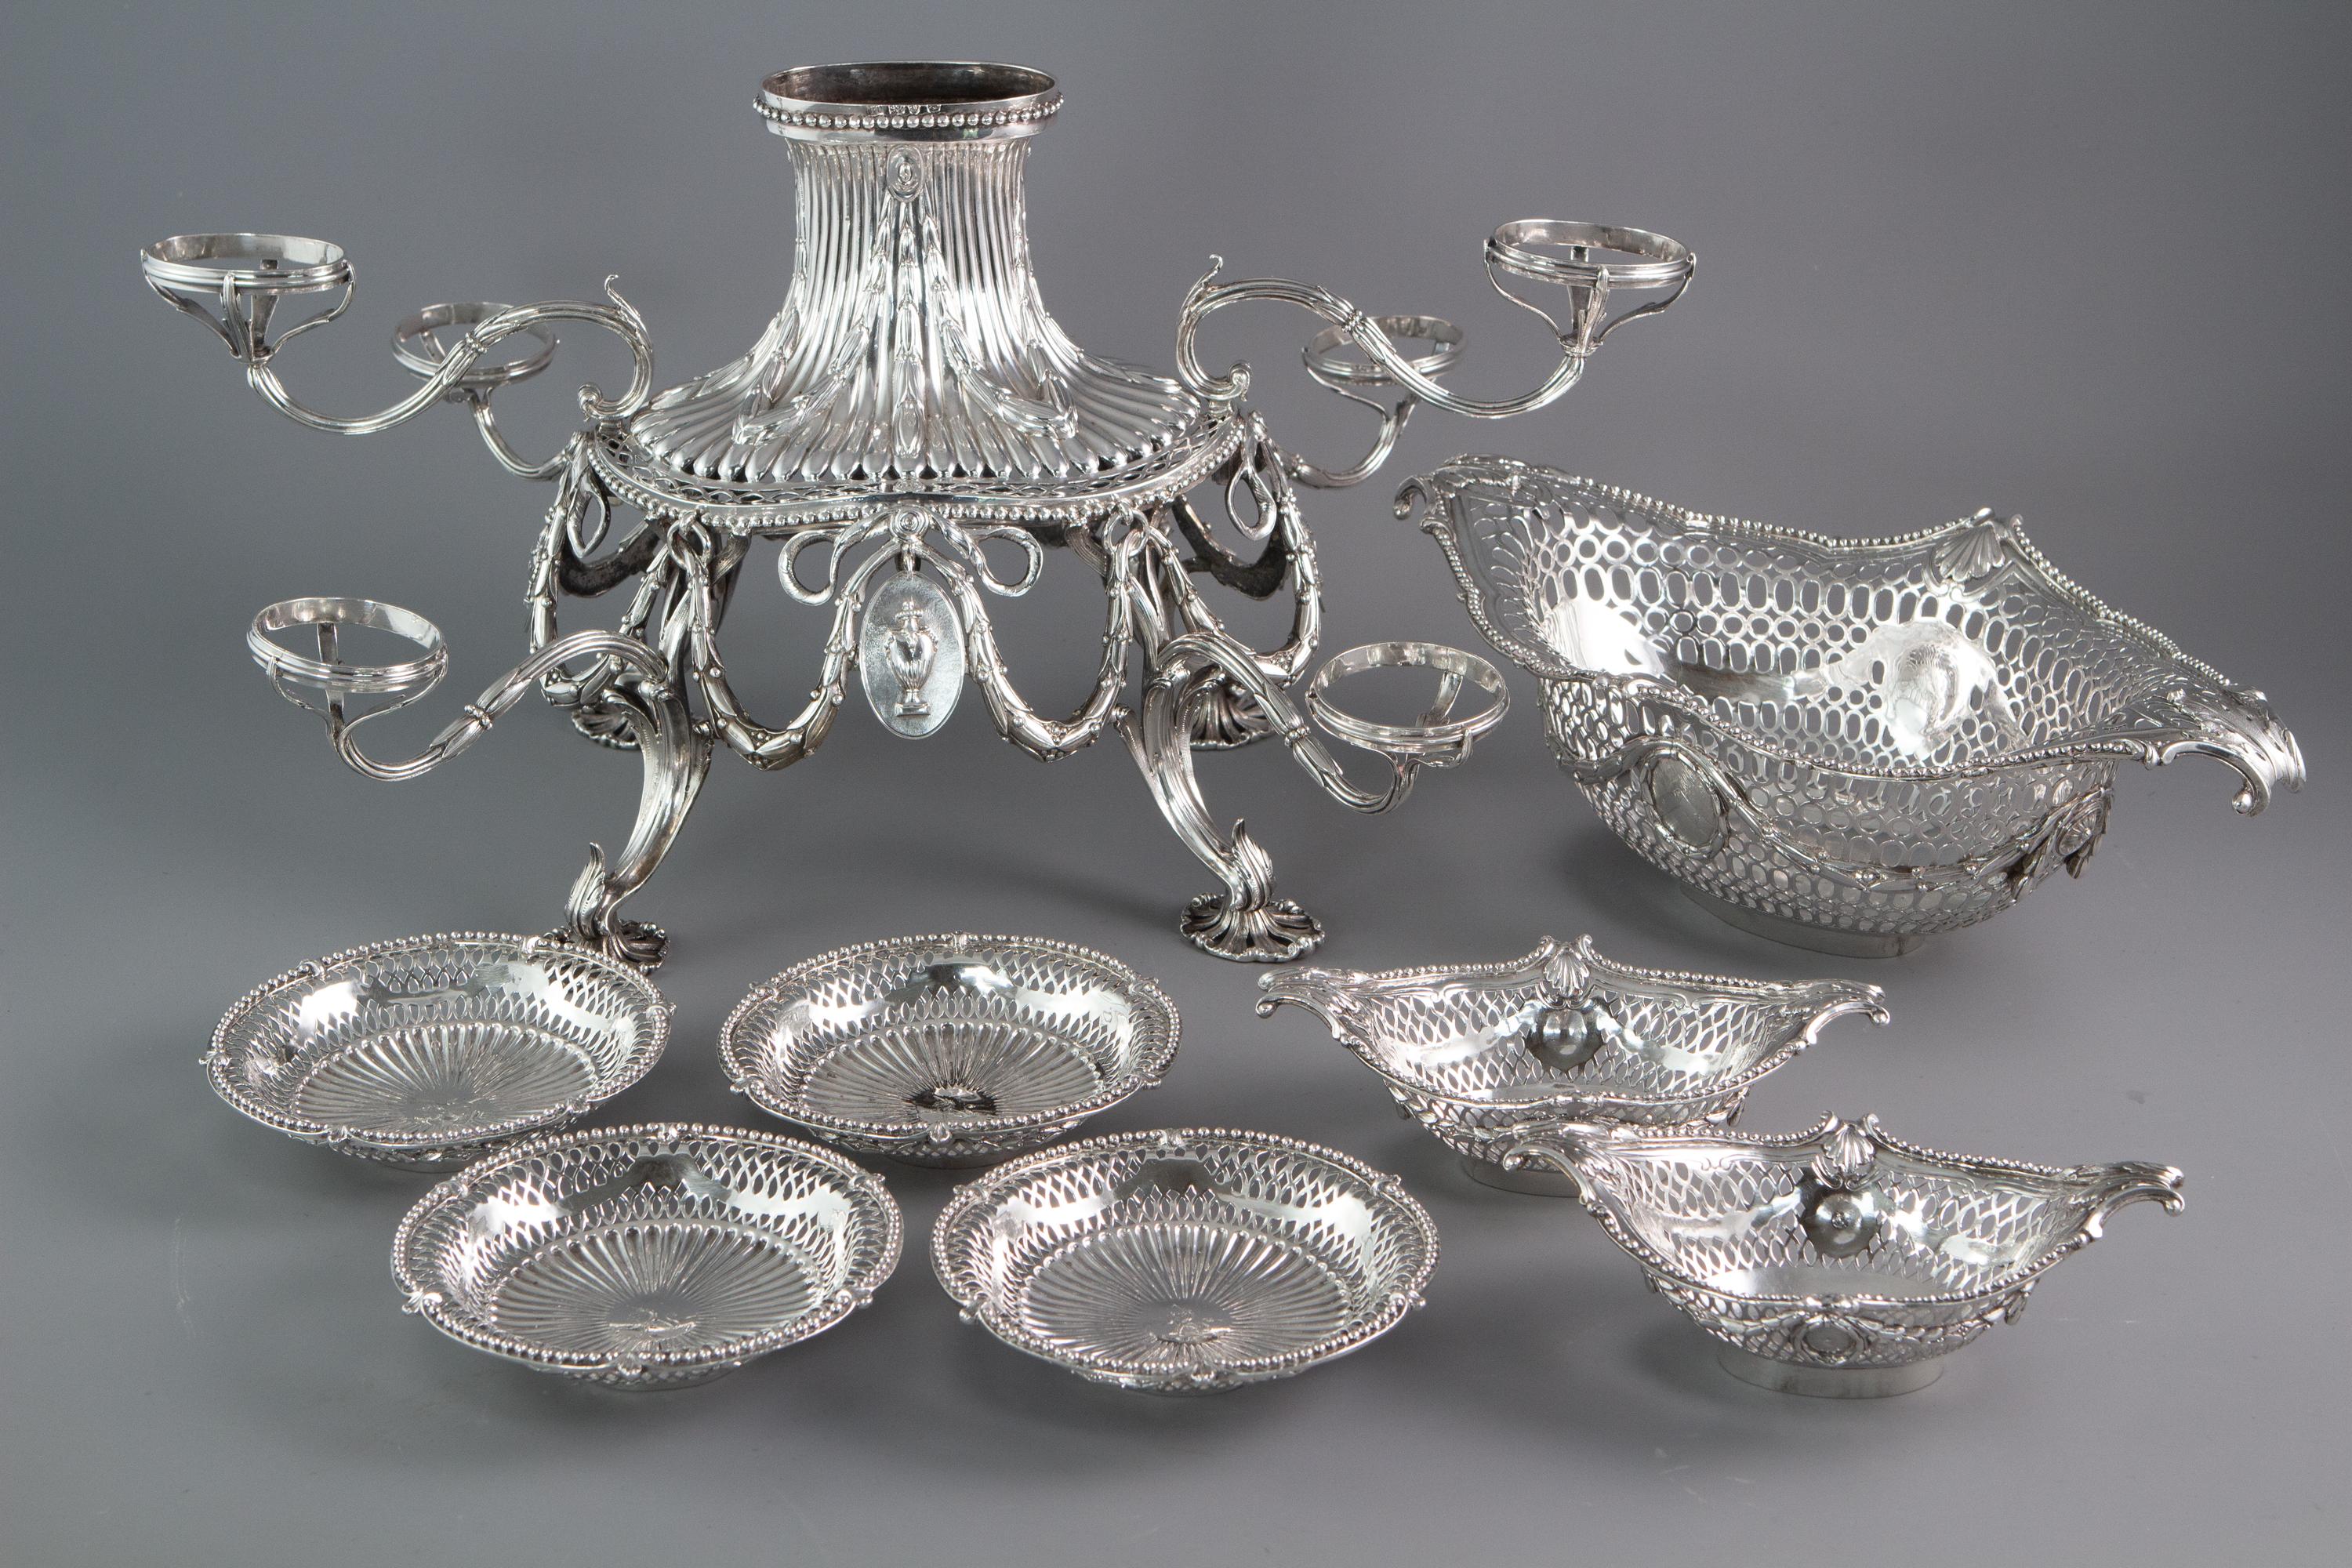 Silver Epergne or Table Centrepiece, Thomas Pitts, London 1773 8